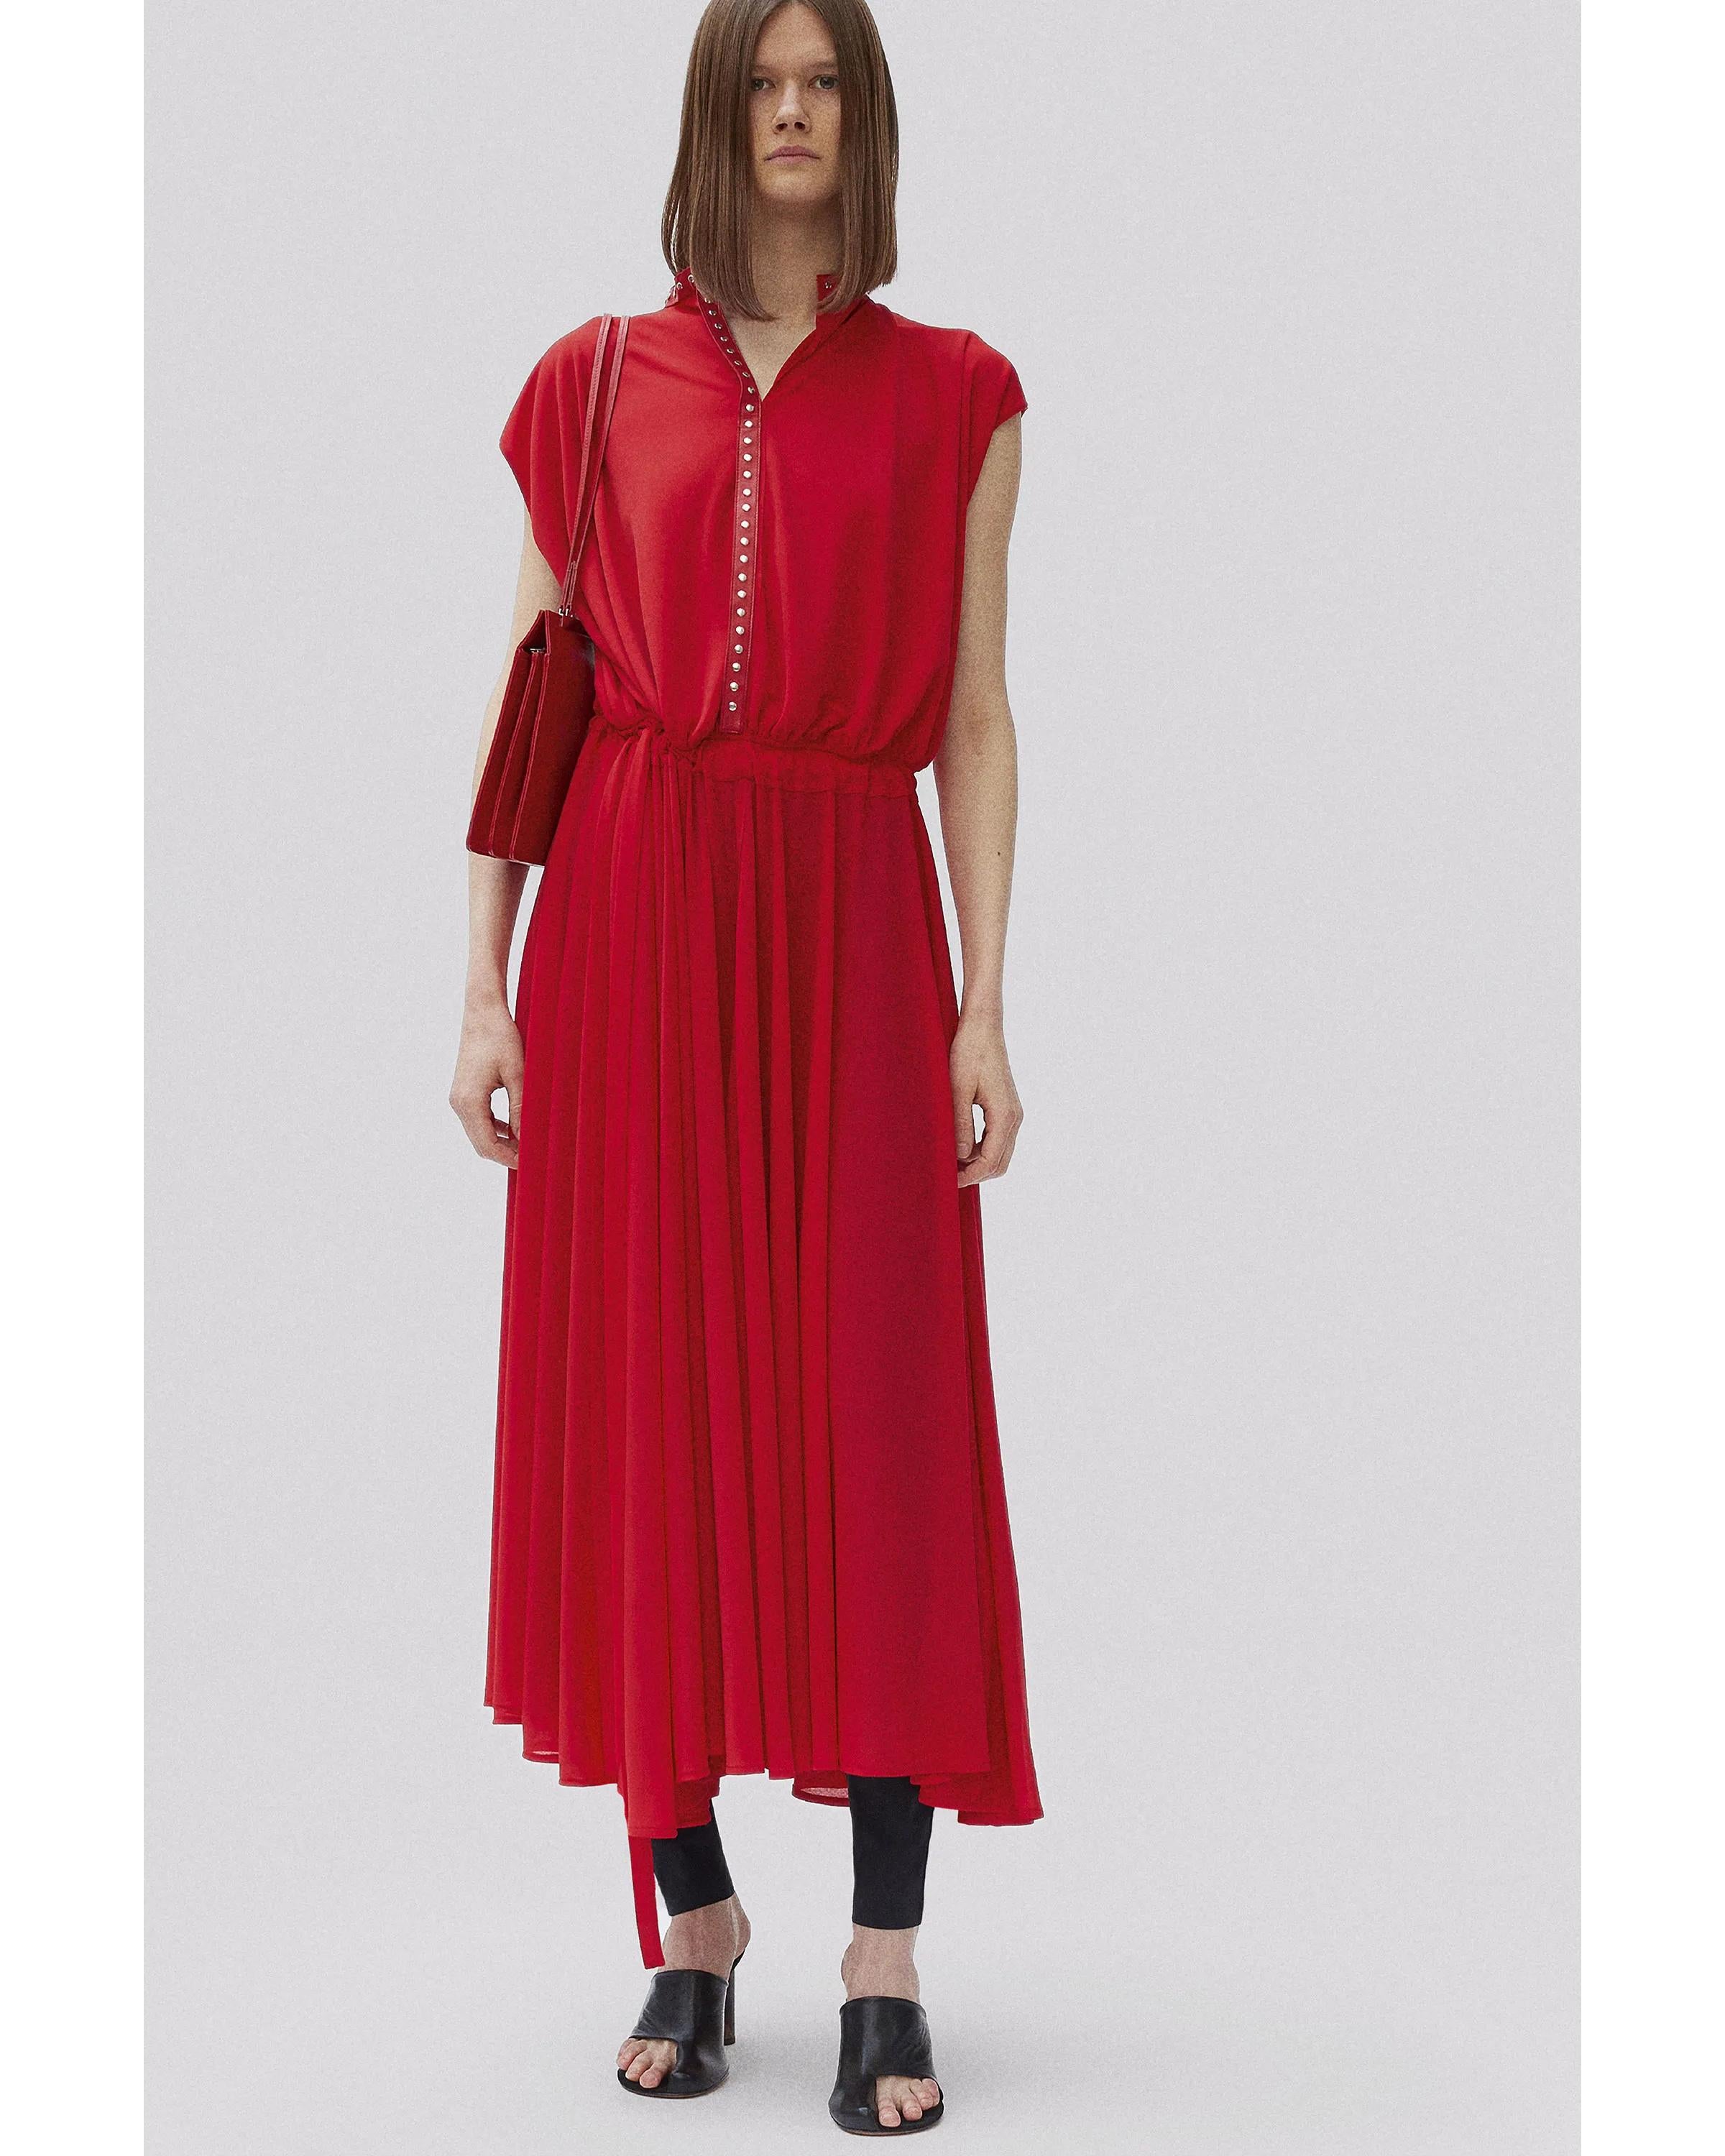 Pre-fall 2017 Old Céline by Phoebe Philo (Old Celine) reversible red cap sleeve silk dress. Semi-sheer crepe voile dress featuring a silver studded leather collar, which goes down the center back seam. On the left side of the waist are self-tie